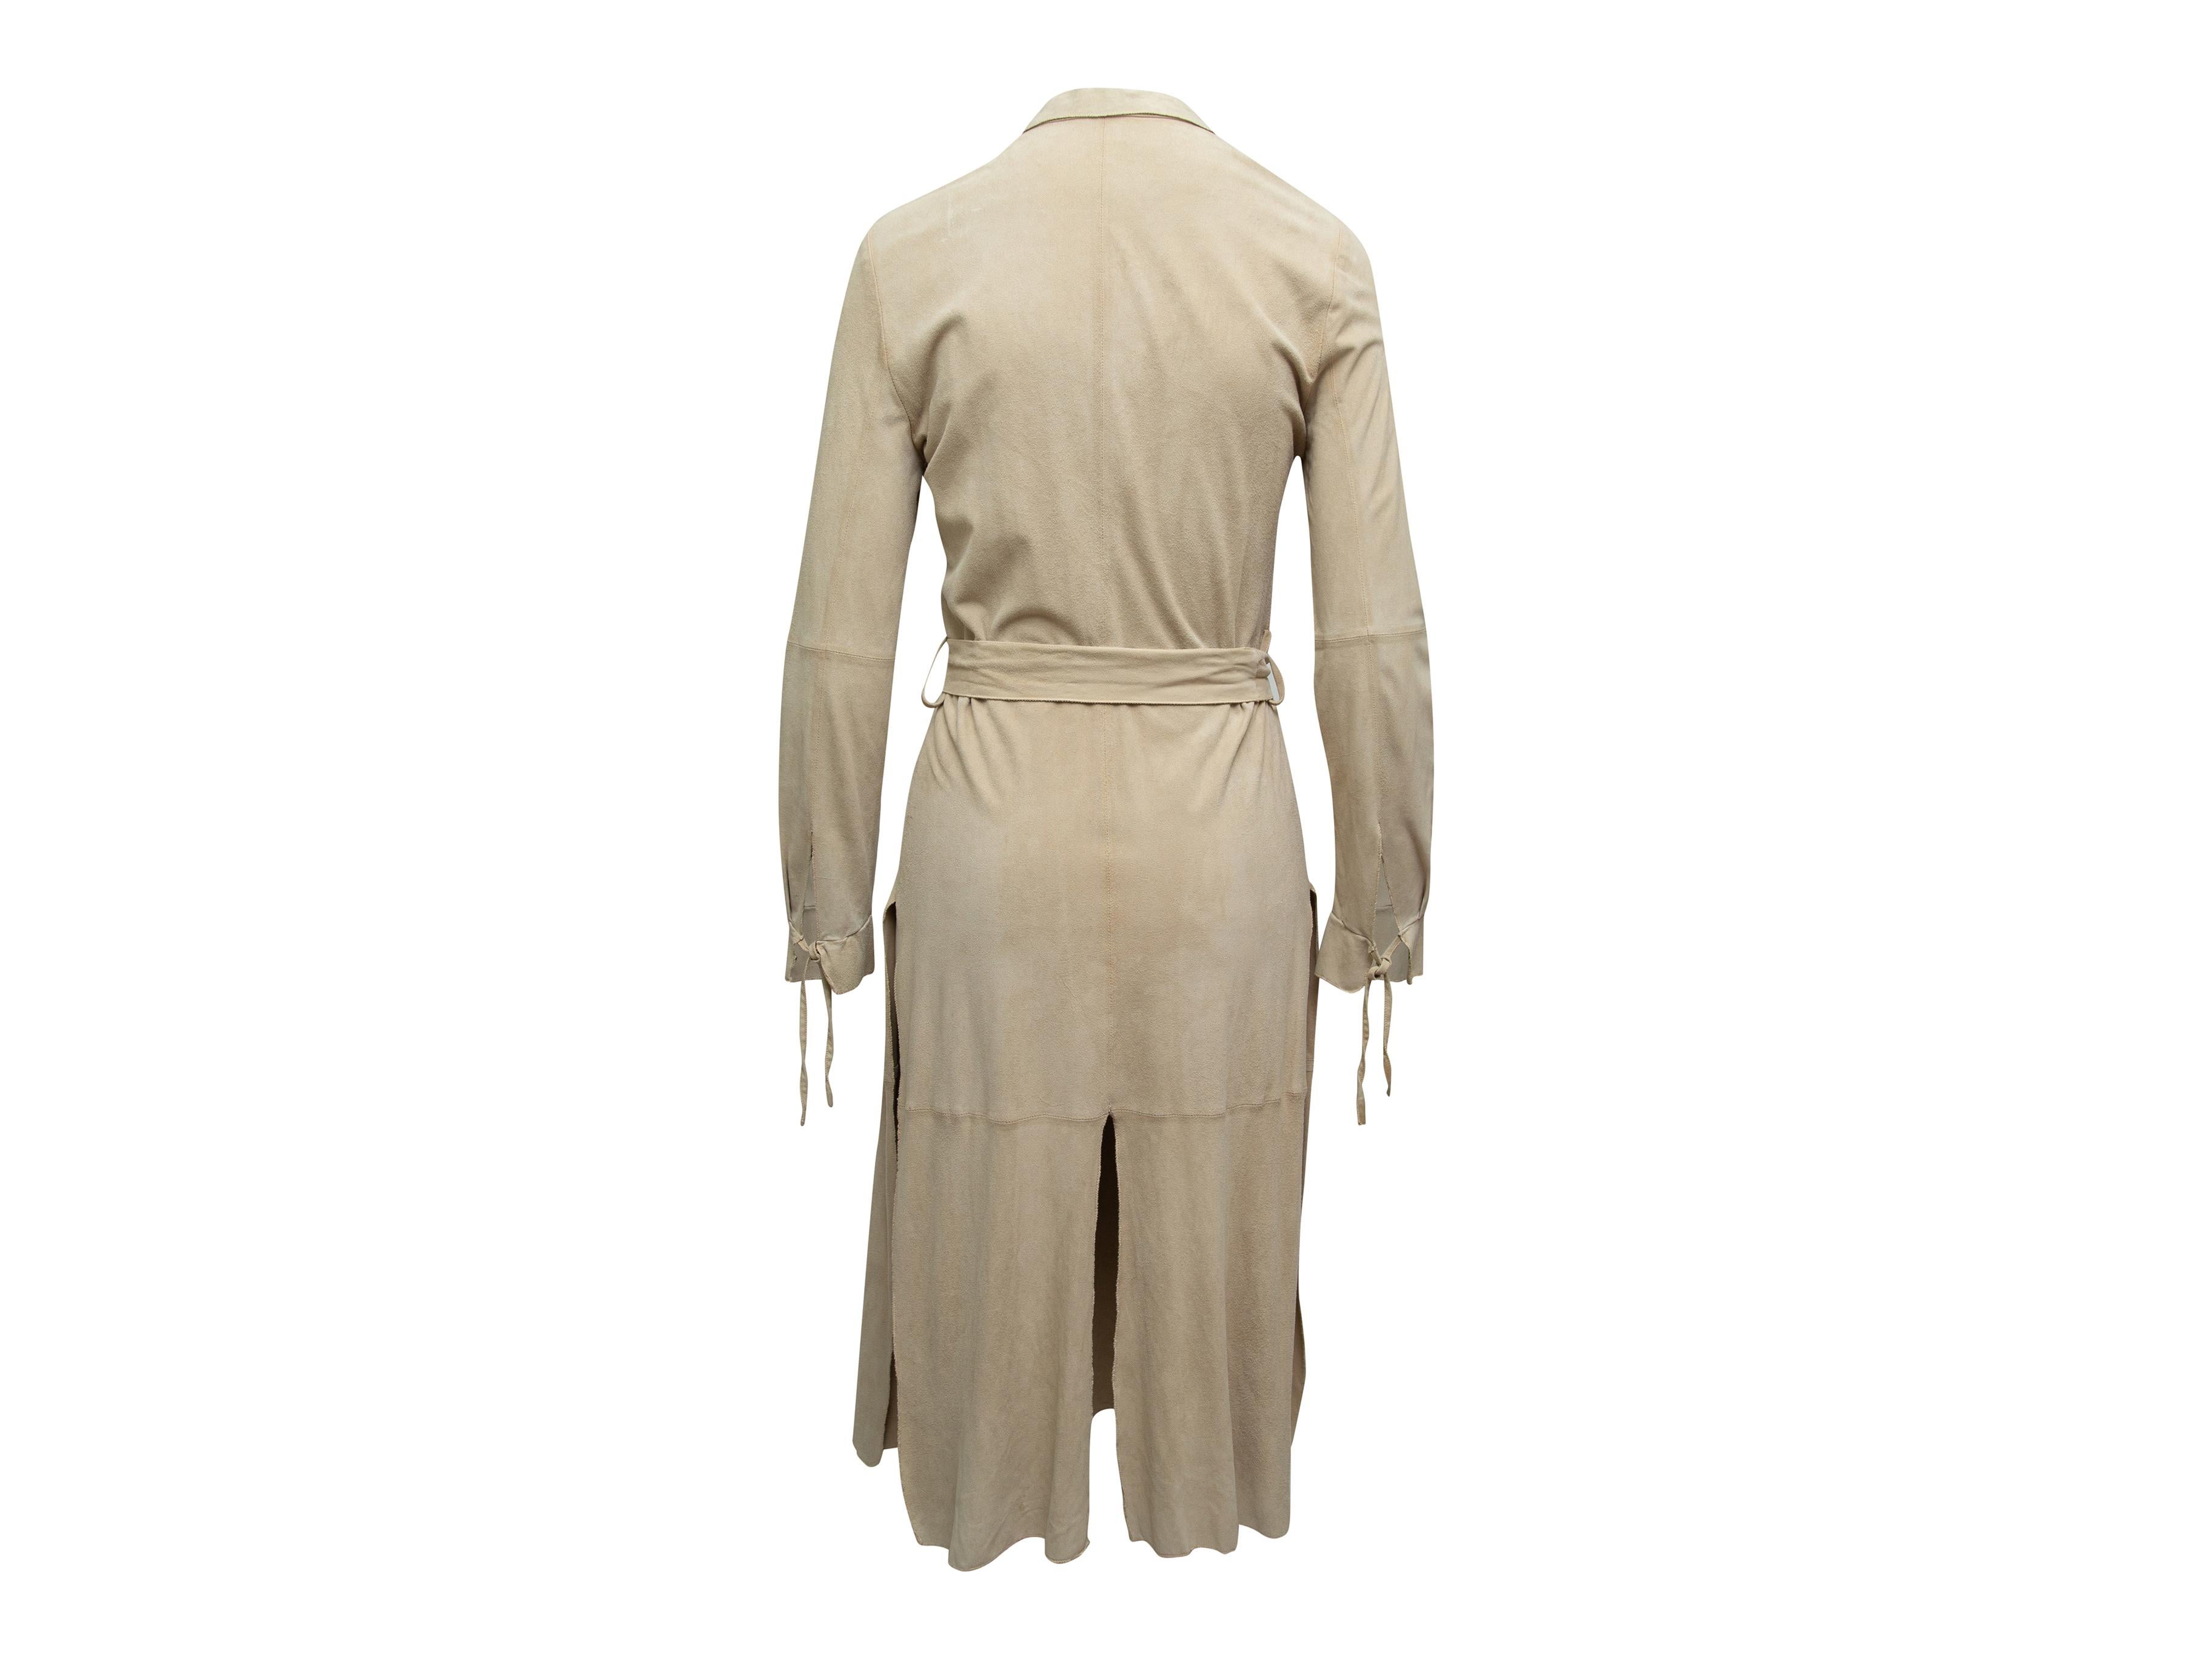 Product details: Beige long suede coat by Giorgio Armani. Tonal stitching throughout. V-neck. Slits at sides and back hem. Tie closure at waist. Designer size 40. 38